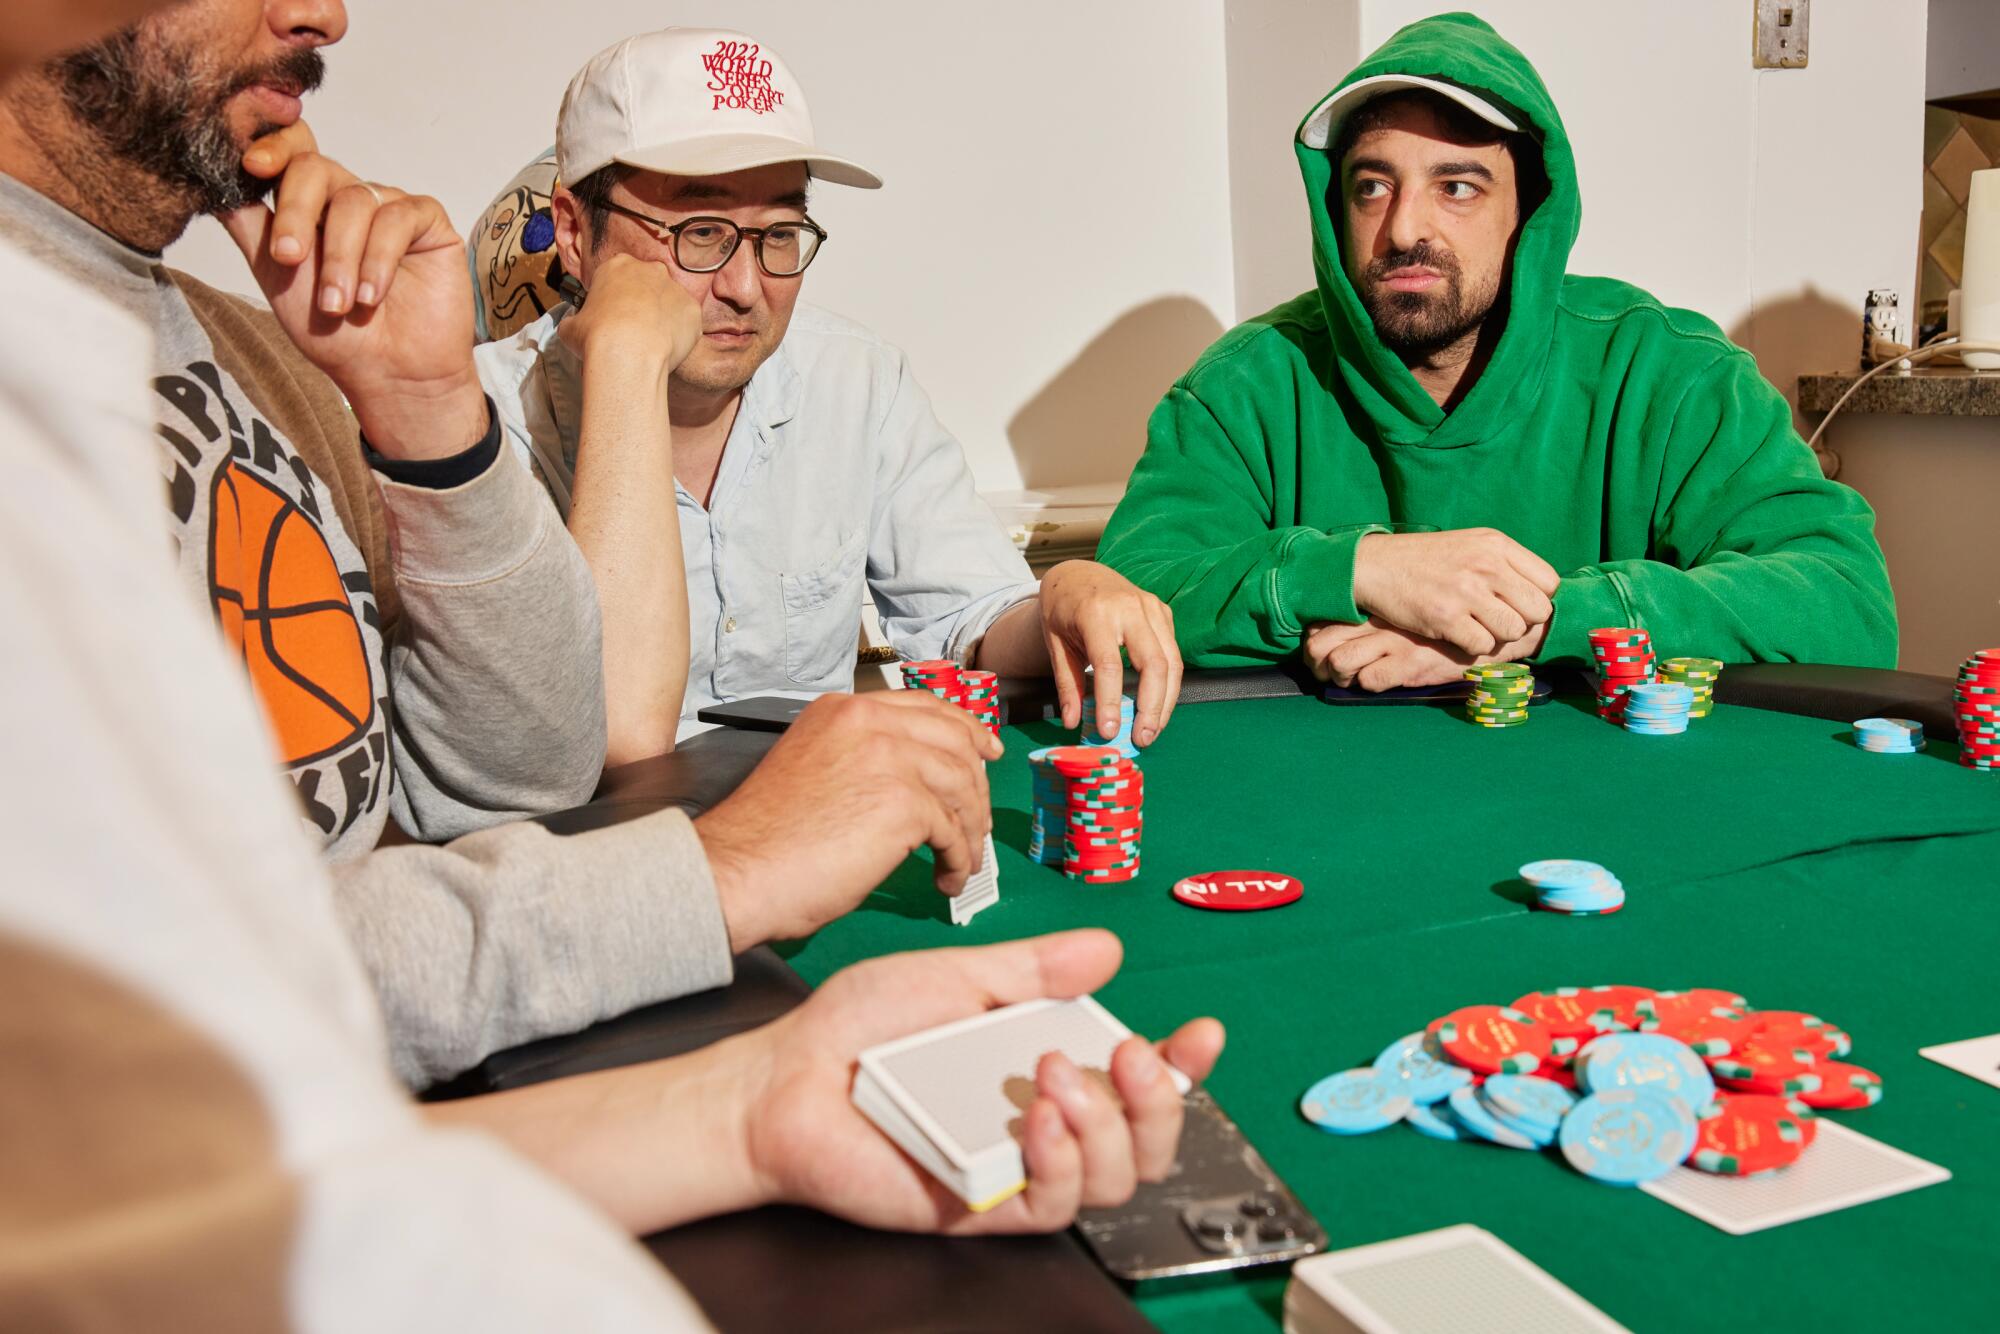 Poker players Grant Levy-Lucero, in a Clippers sweater, Eric Kim in a baseball hat and Jason Roussos in a green hoodie